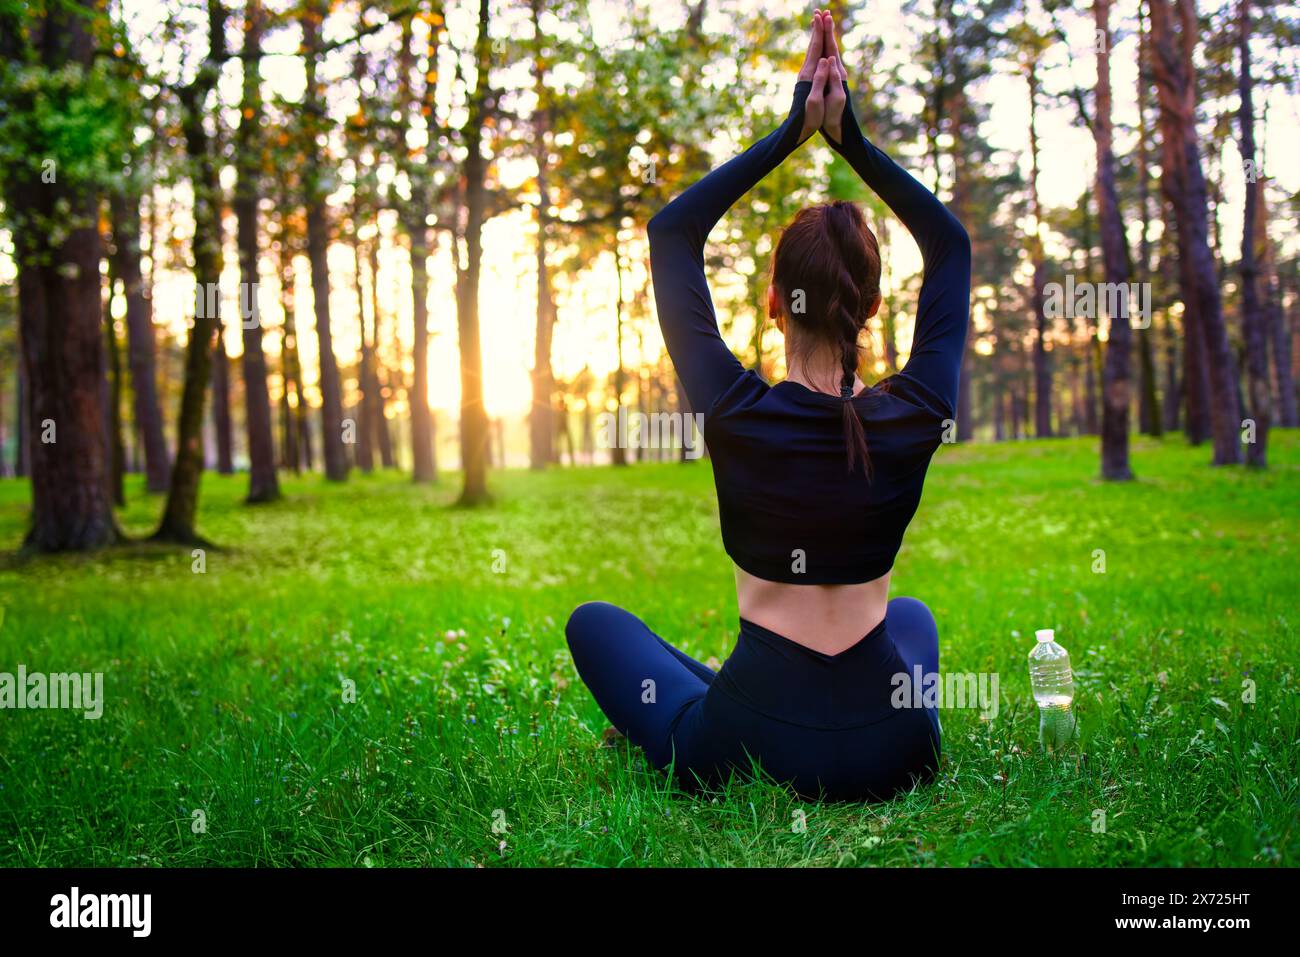 Slim beautiful woman in black tight fitting tracksuit sitting on grass in forest in yoga pose. Stock Photo